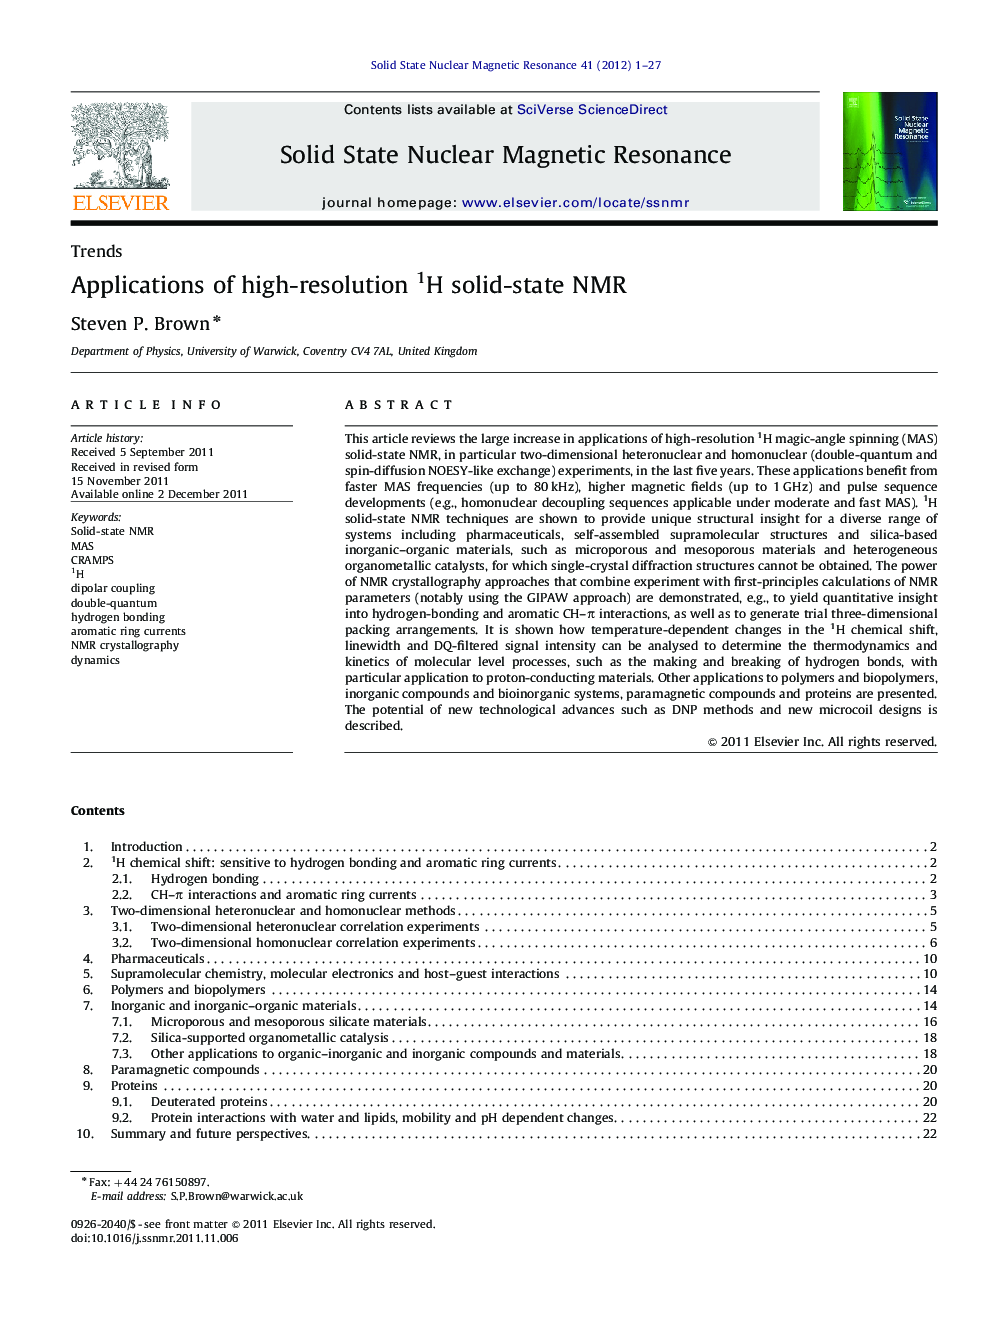 Applications of high-resolution 1H solid-state NMR